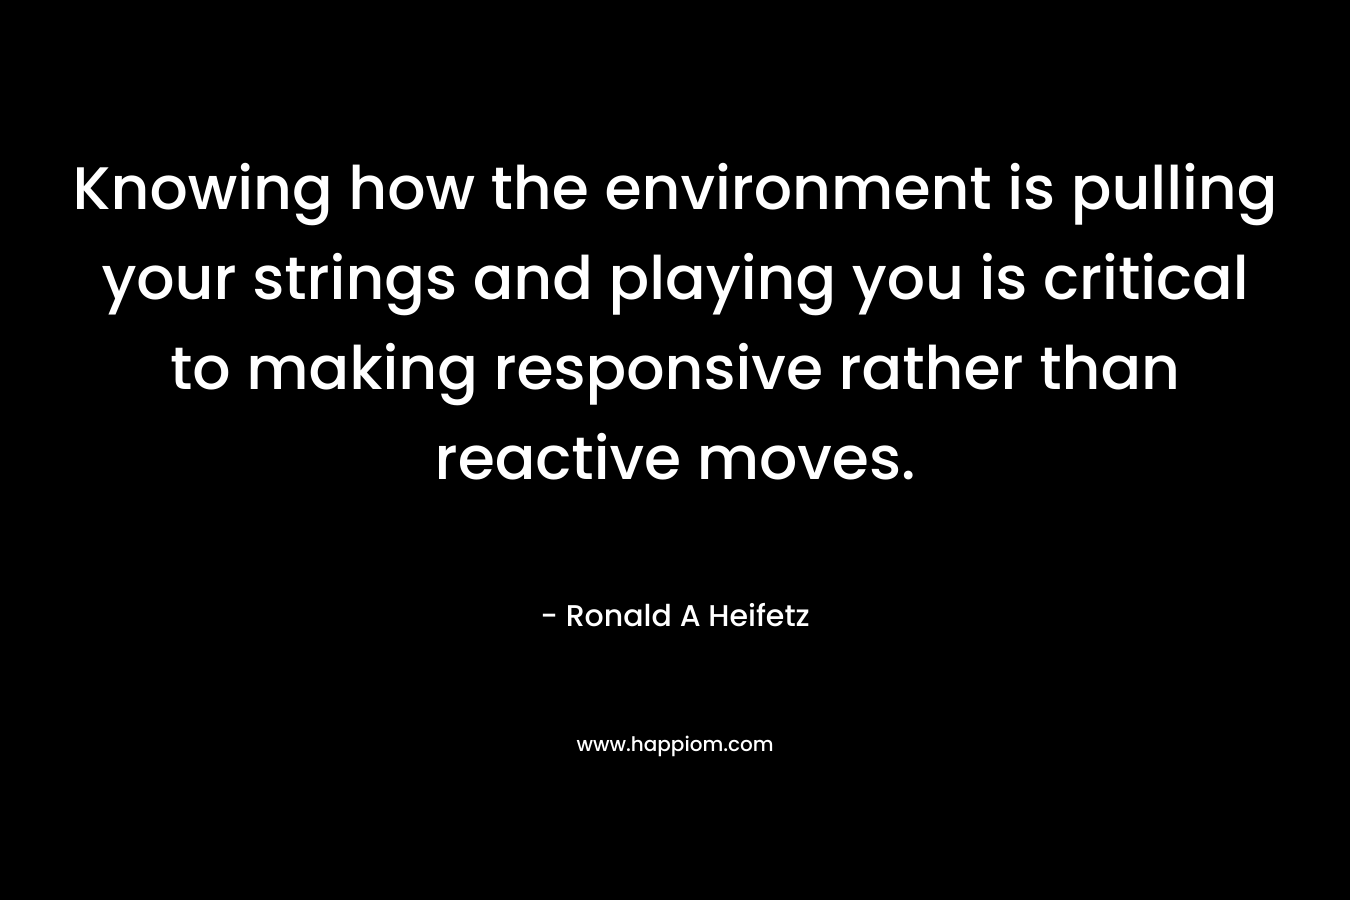 Knowing how the environment is pulling your strings and playing you is critical to making responsive rather than reactive moves.